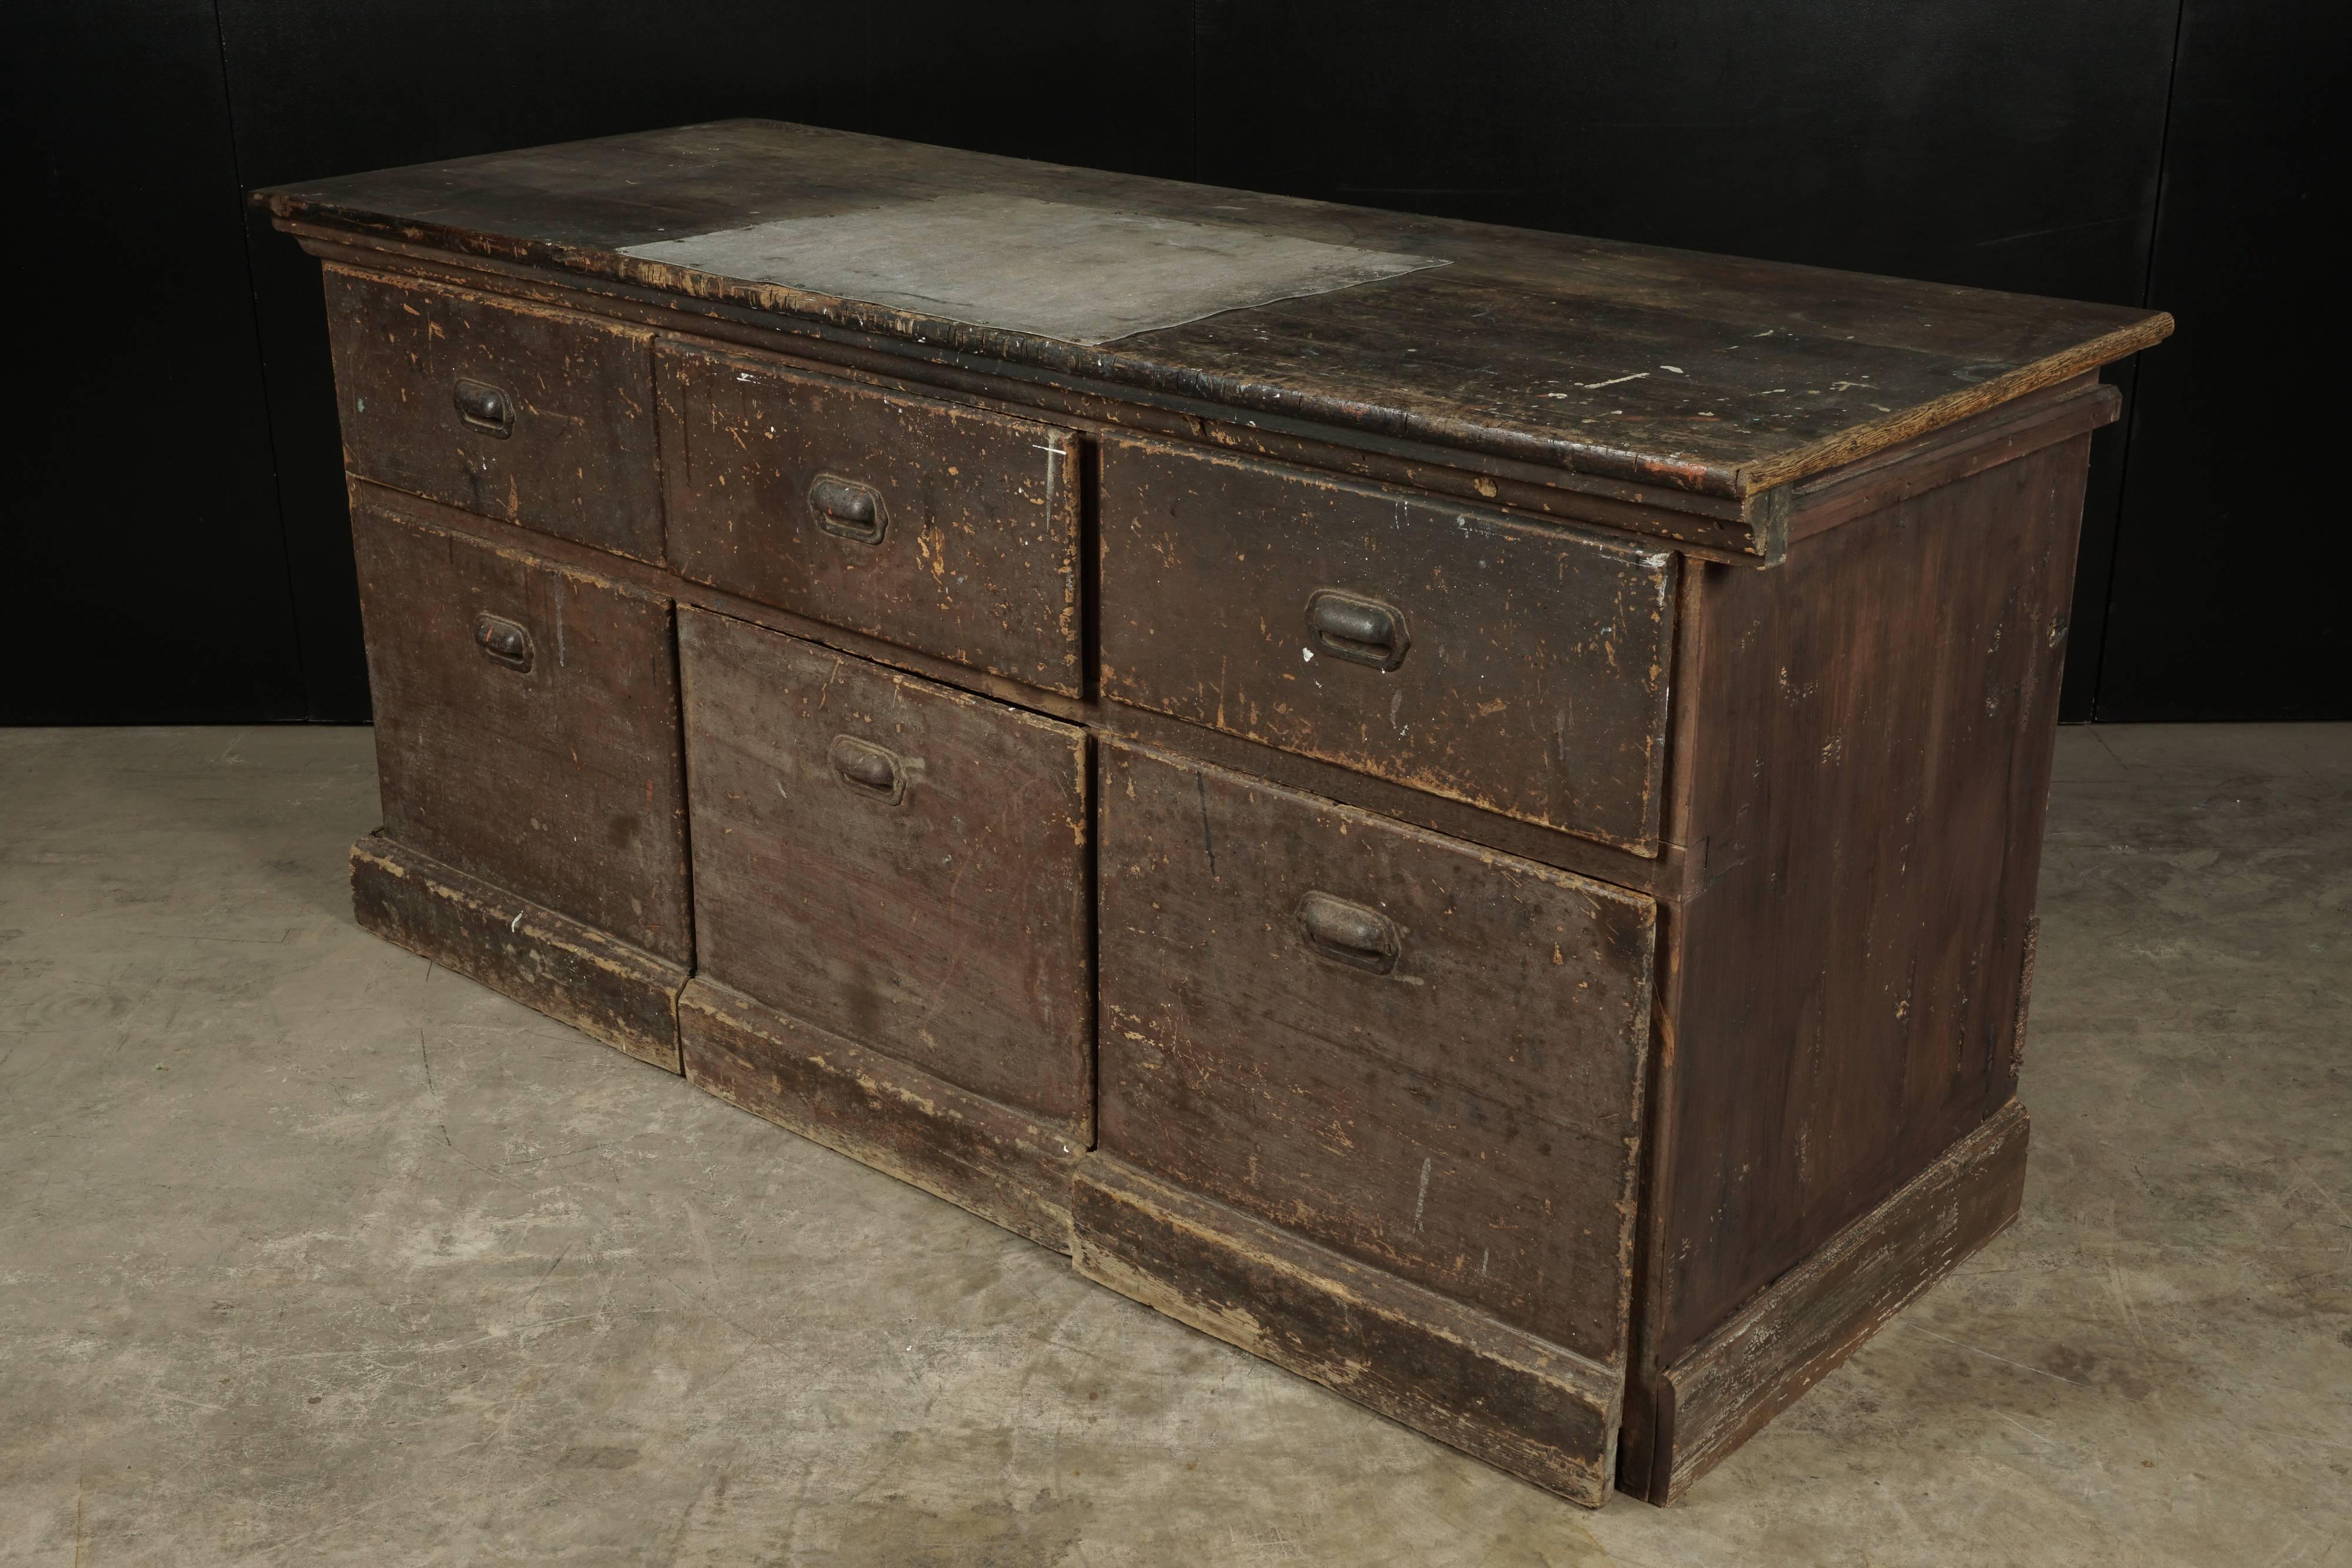 Rare French bakery chest from France, circa 1920. Fantastic original color and patina. Three bottom drawers on casters for easier operation.